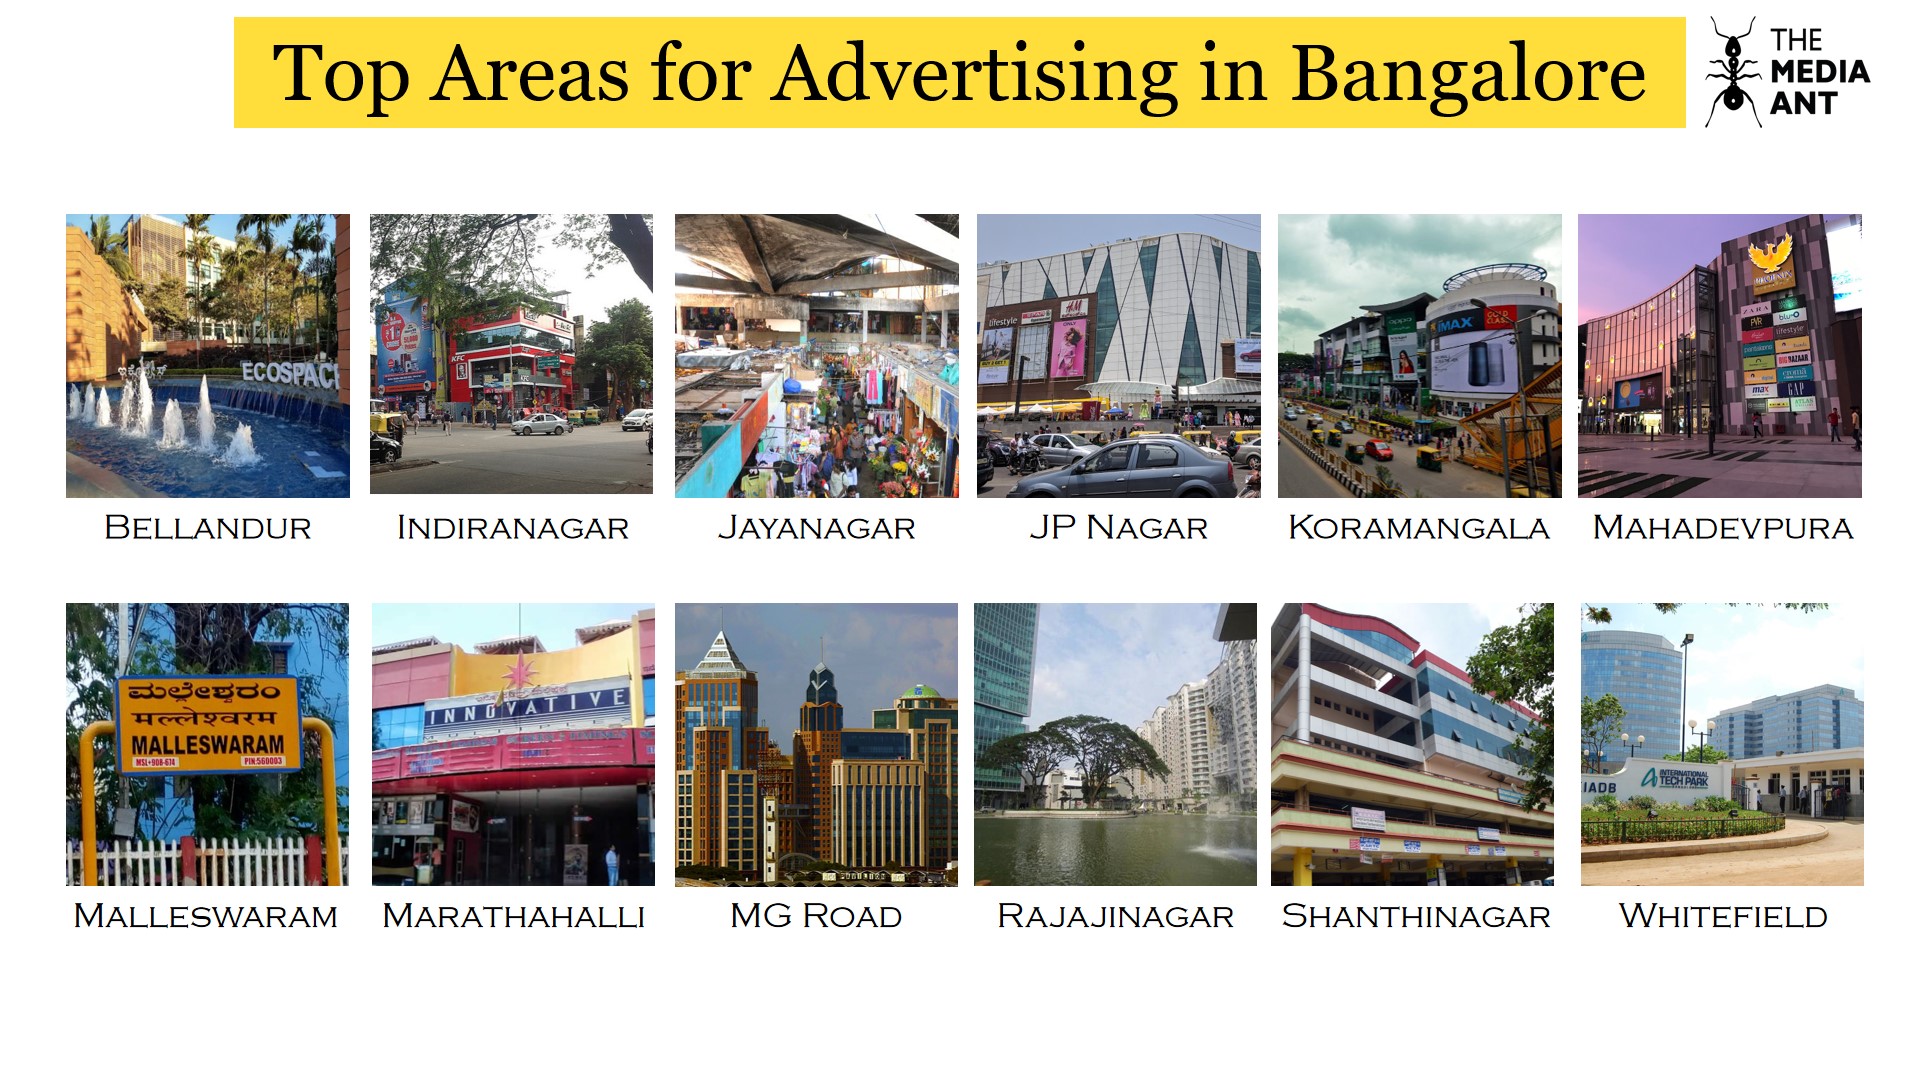 Top areas for advertising in Bangalore